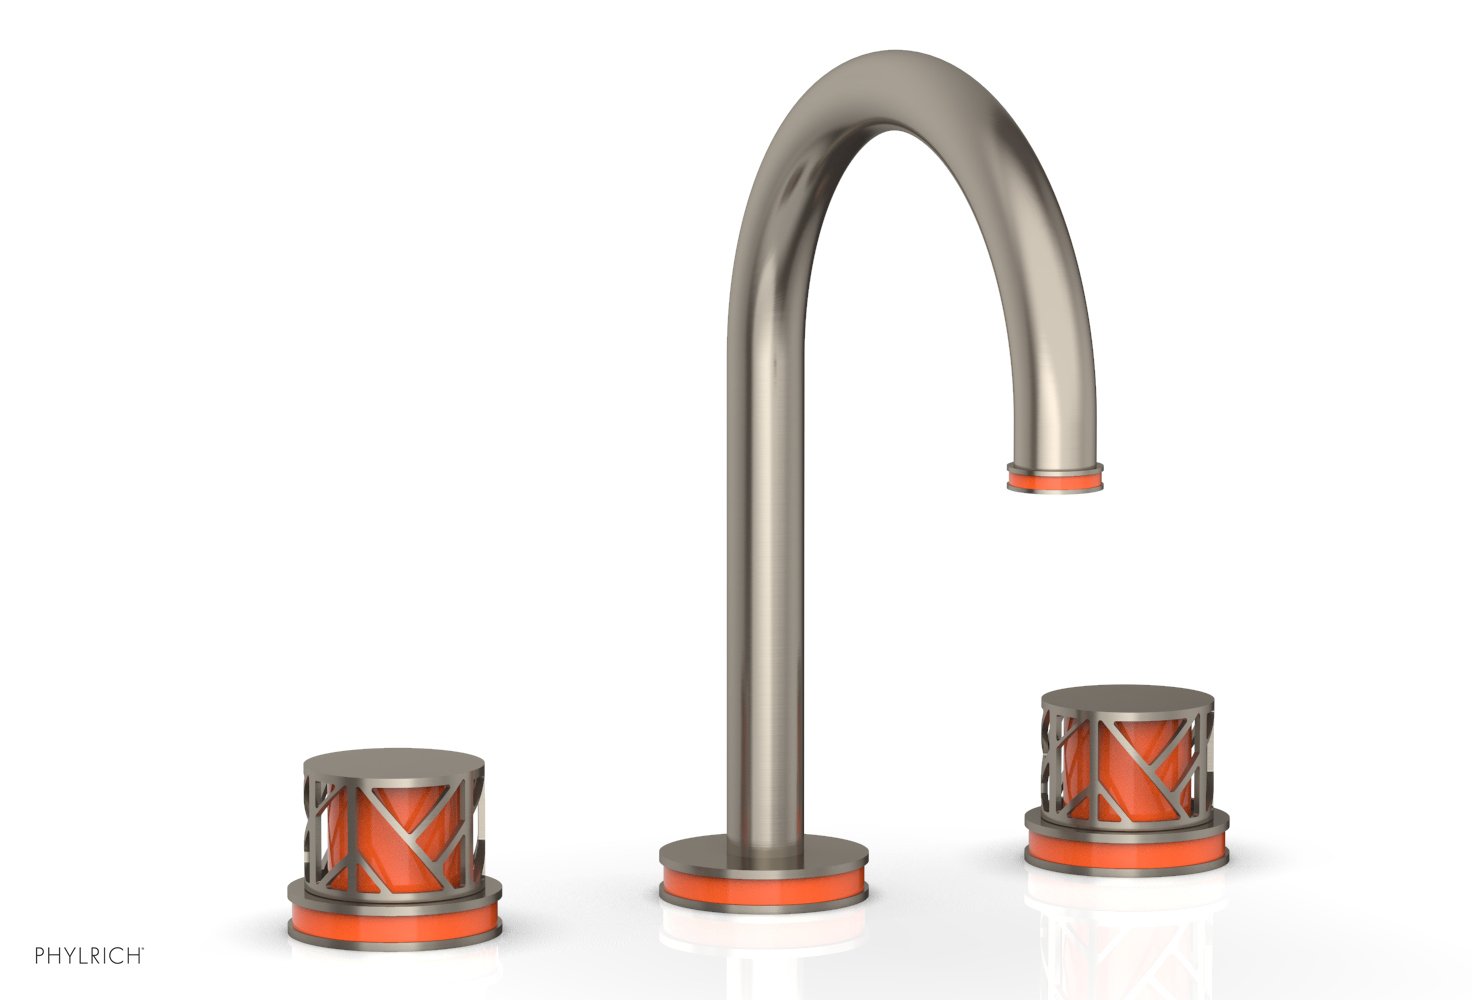 Phylrich JOLIE Widespread Faucet - Round Handles with "Orange" Accents